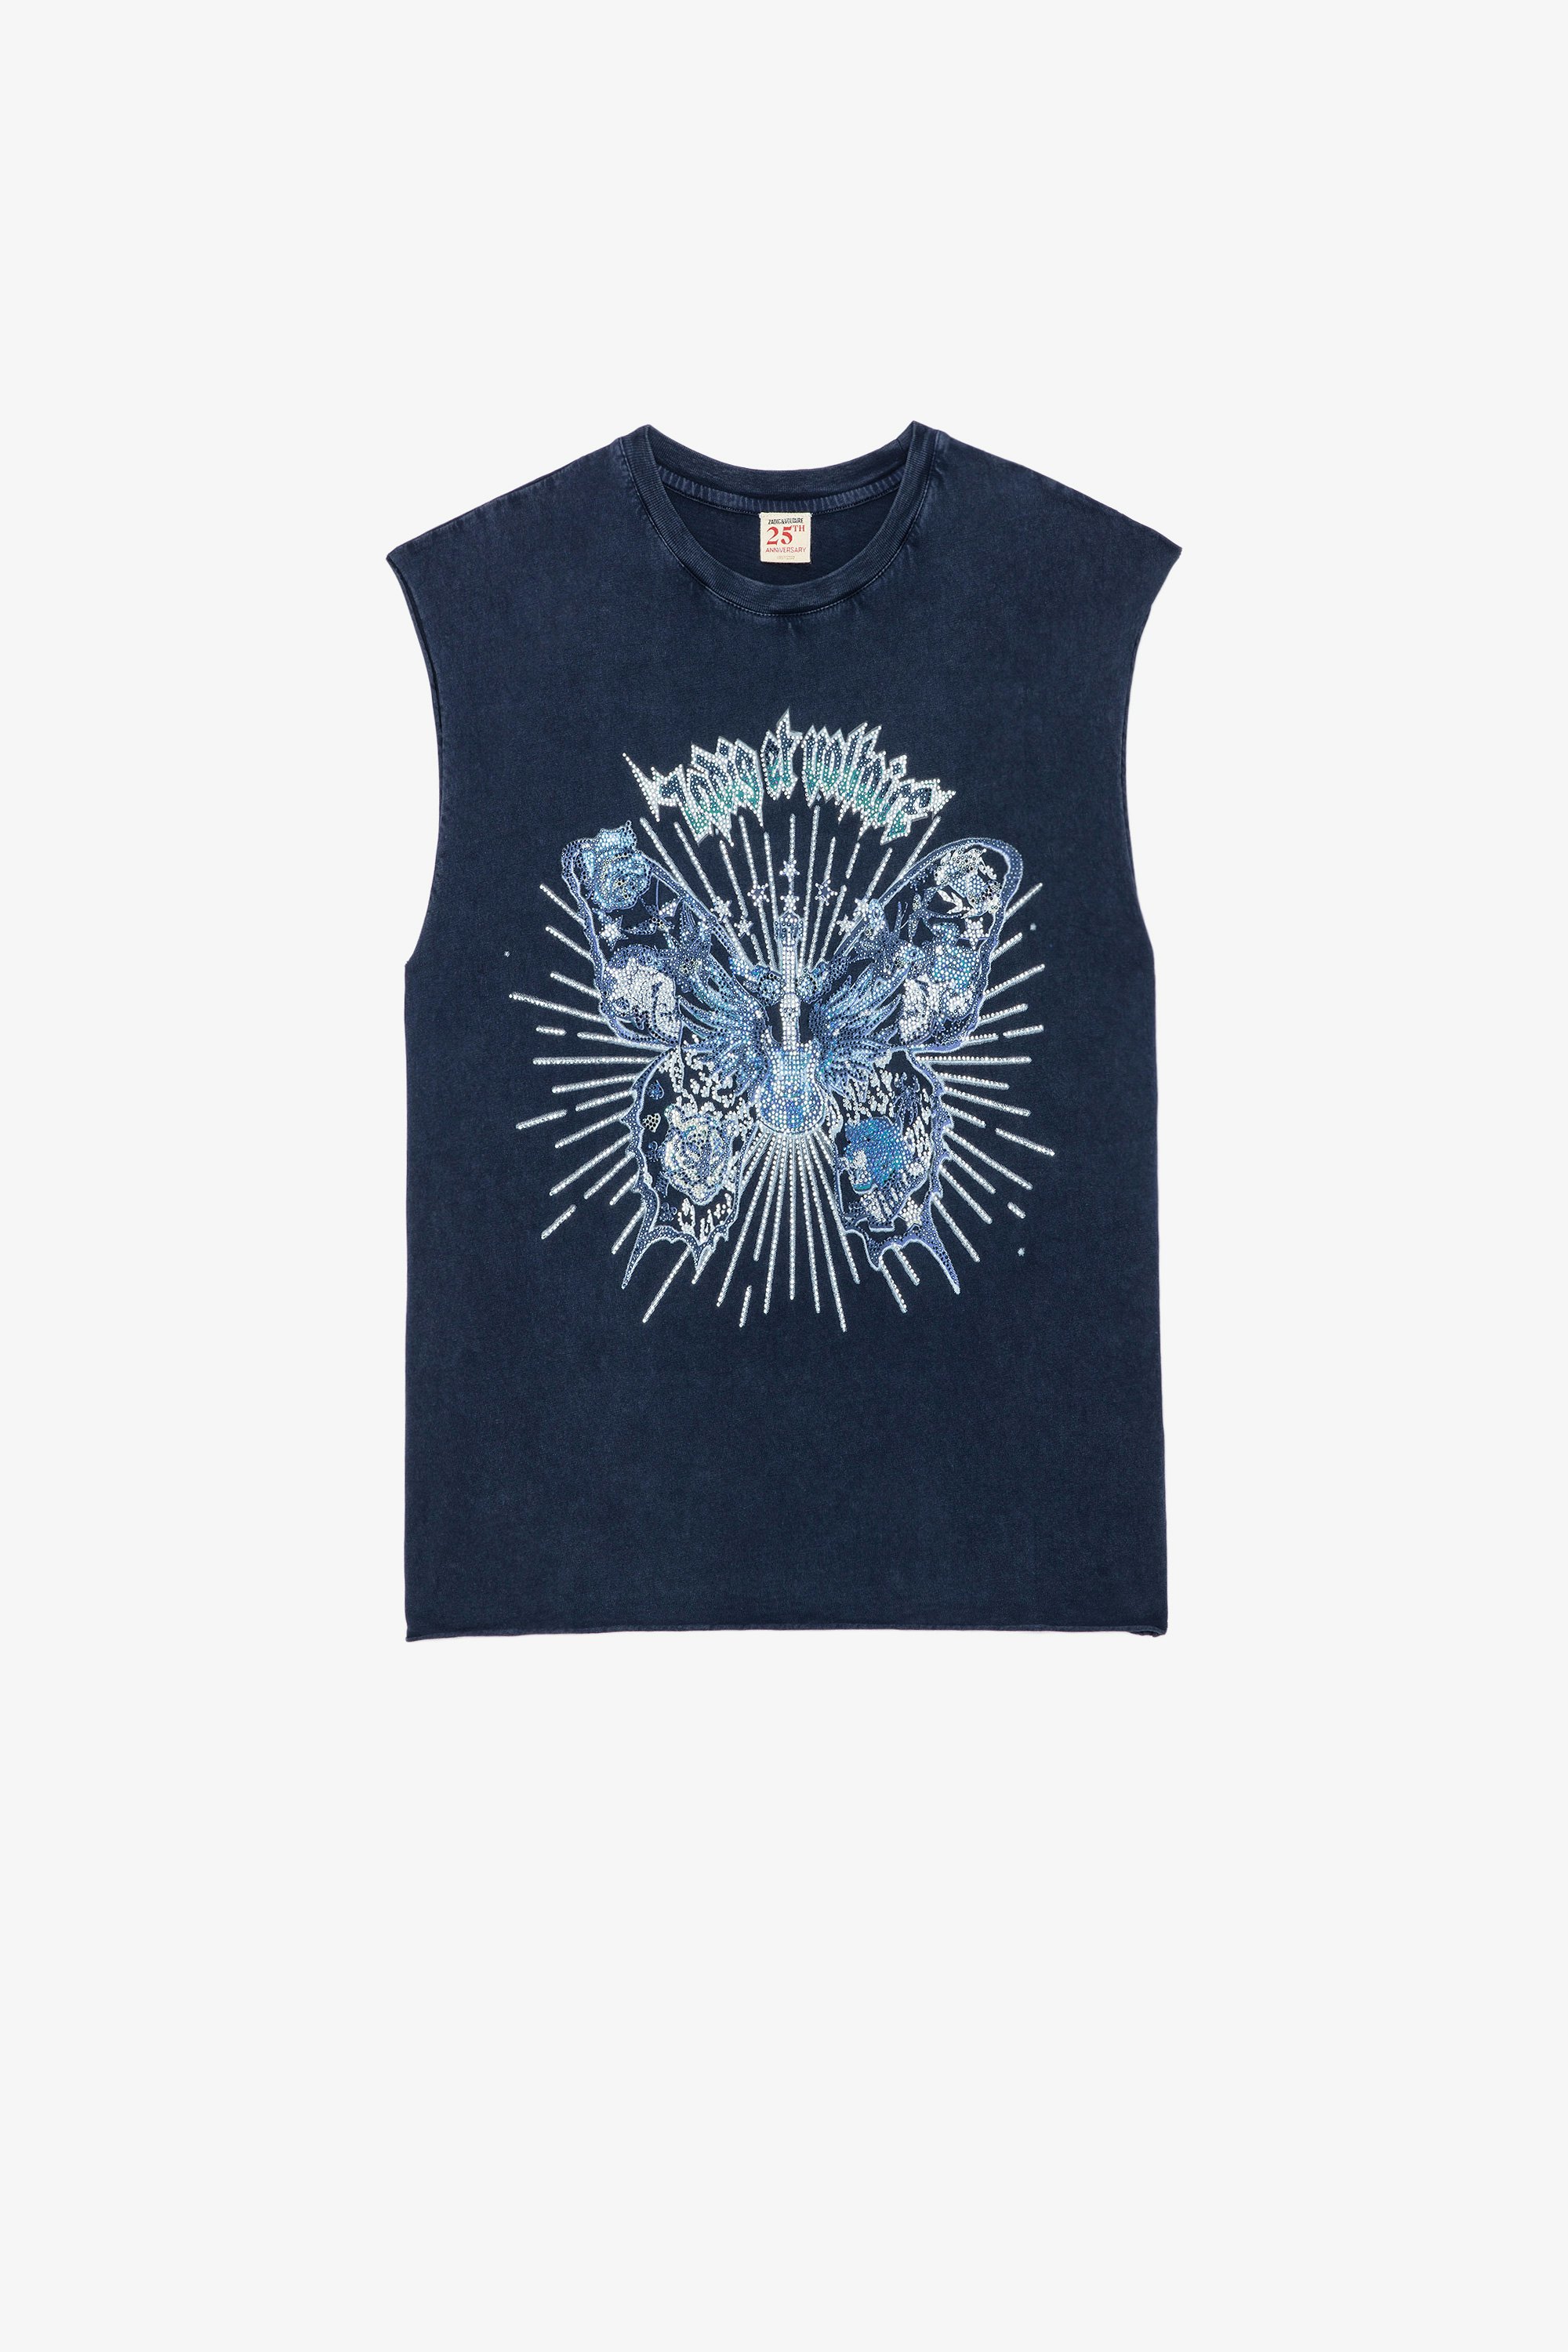 Cecilia Butterfly Tank トップス Women's navy blue cotton tank top with crystal-embellished butterfly print